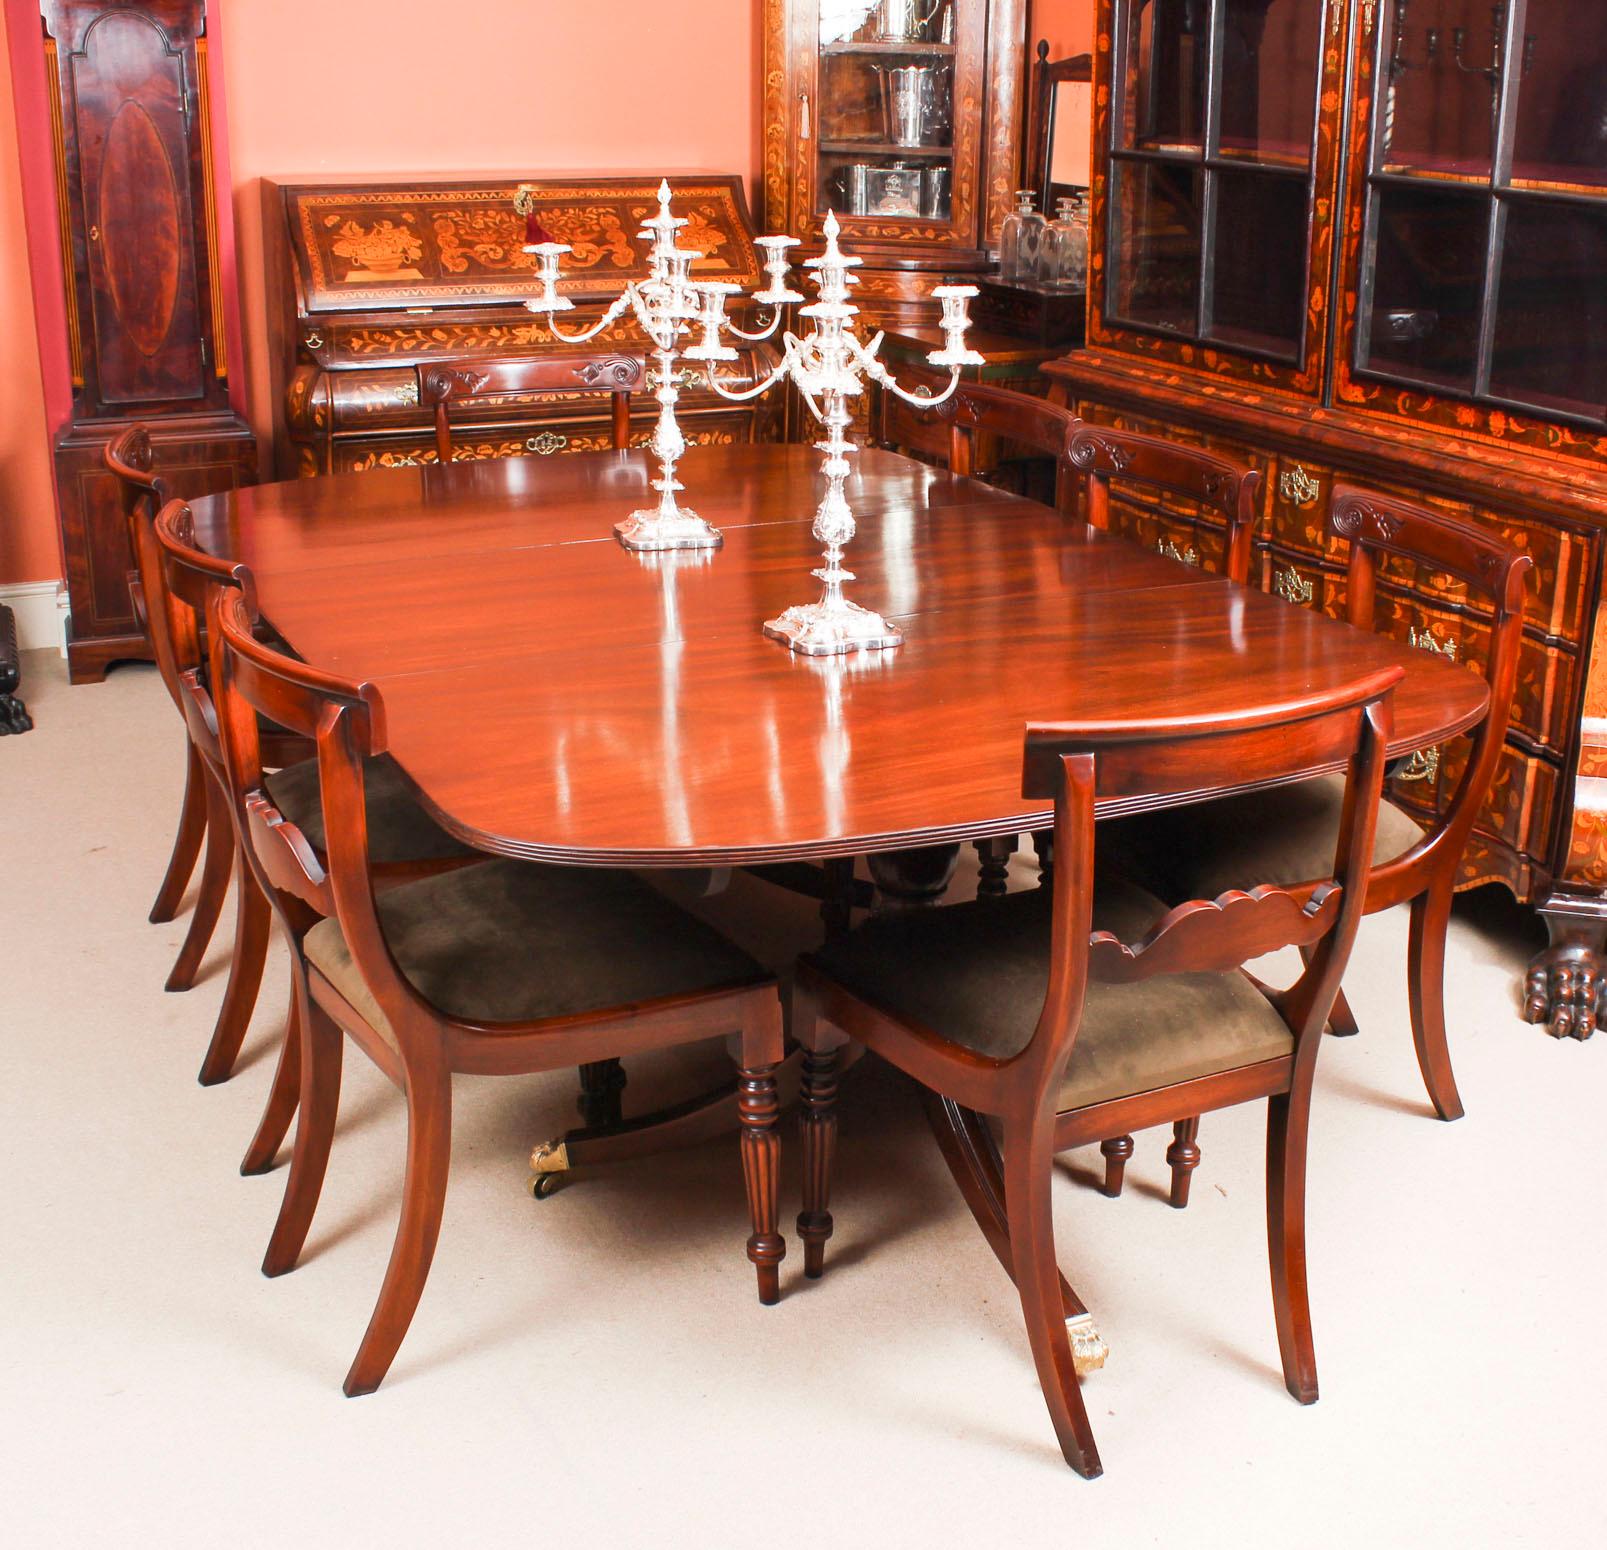 This is an elegant dining set comprising an antique George III Regency Period dining table, circa 1820 in date, with a fabulous set of eight bespoke Regency style dining chairs.

The table has one additional leaf and is raised on twin 